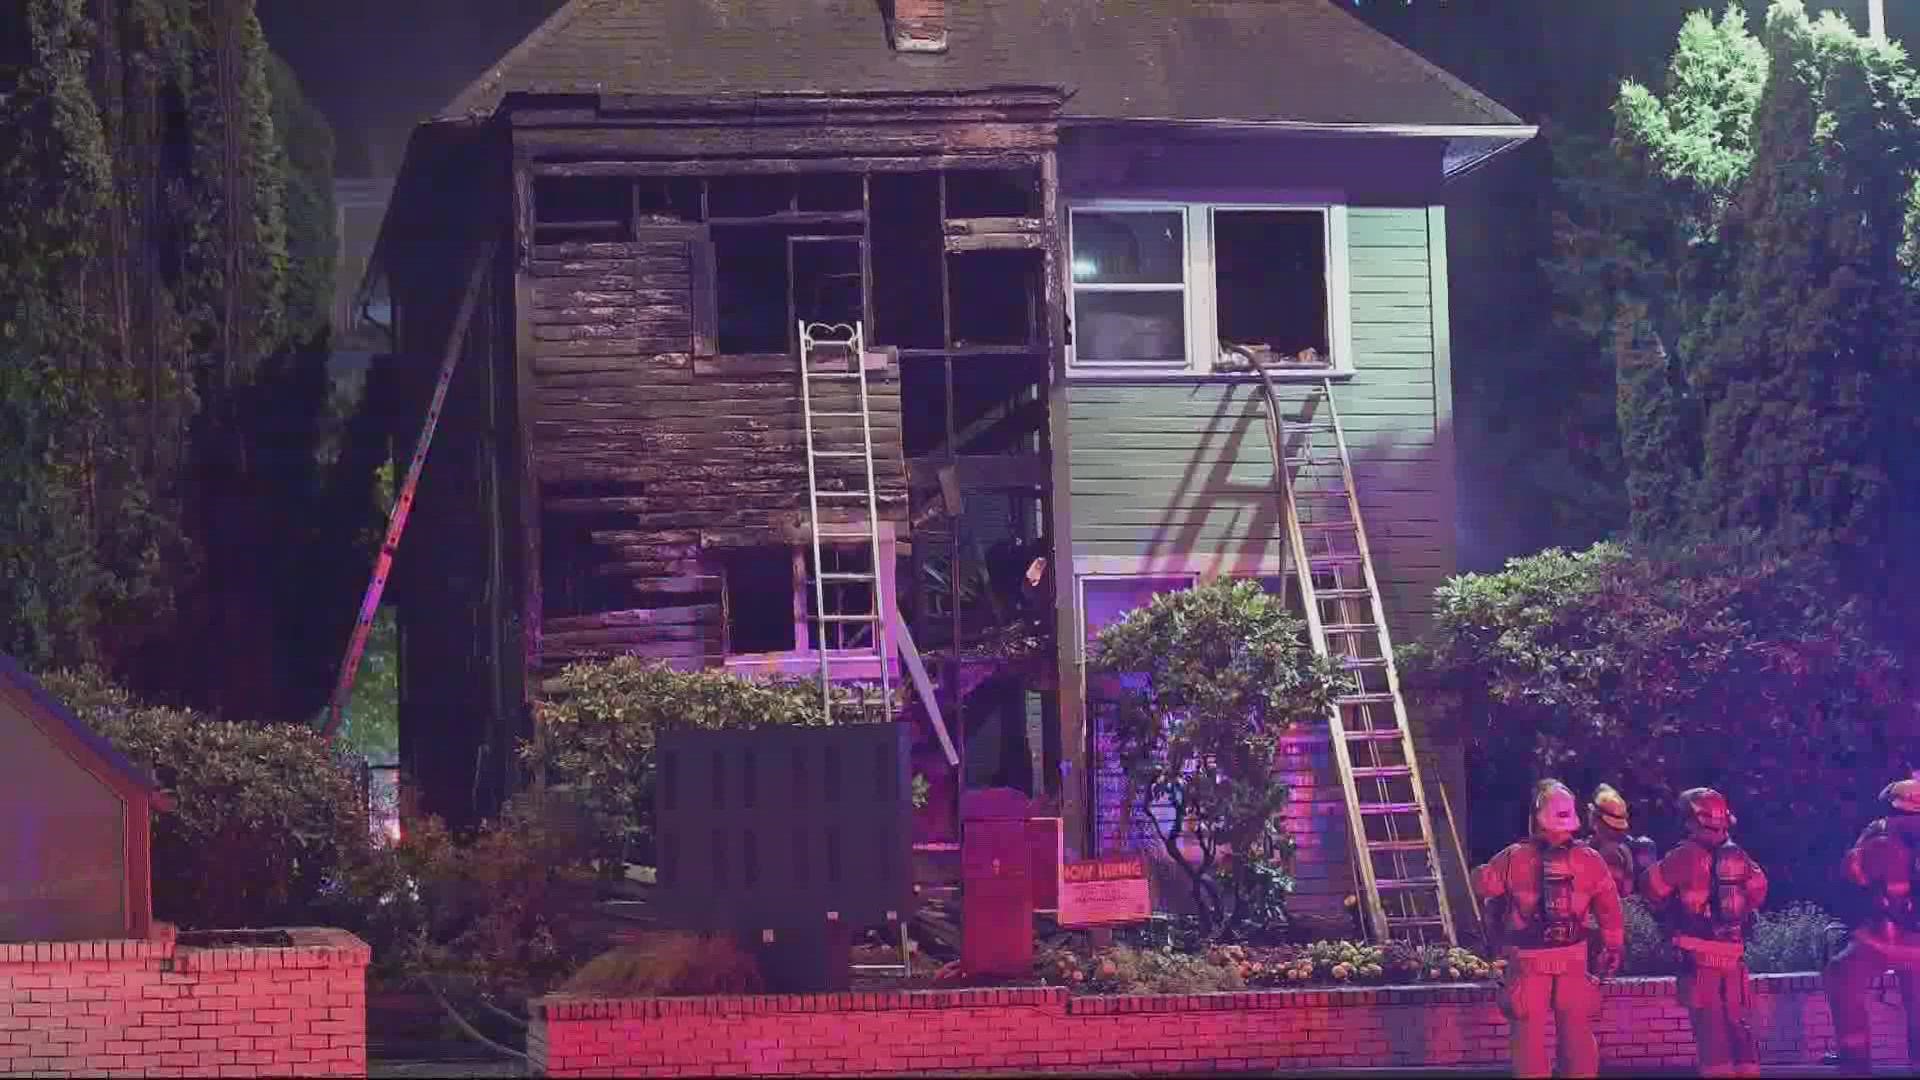 Fire officials said investigators at the scene determined that the person's death was not caused by the fire.